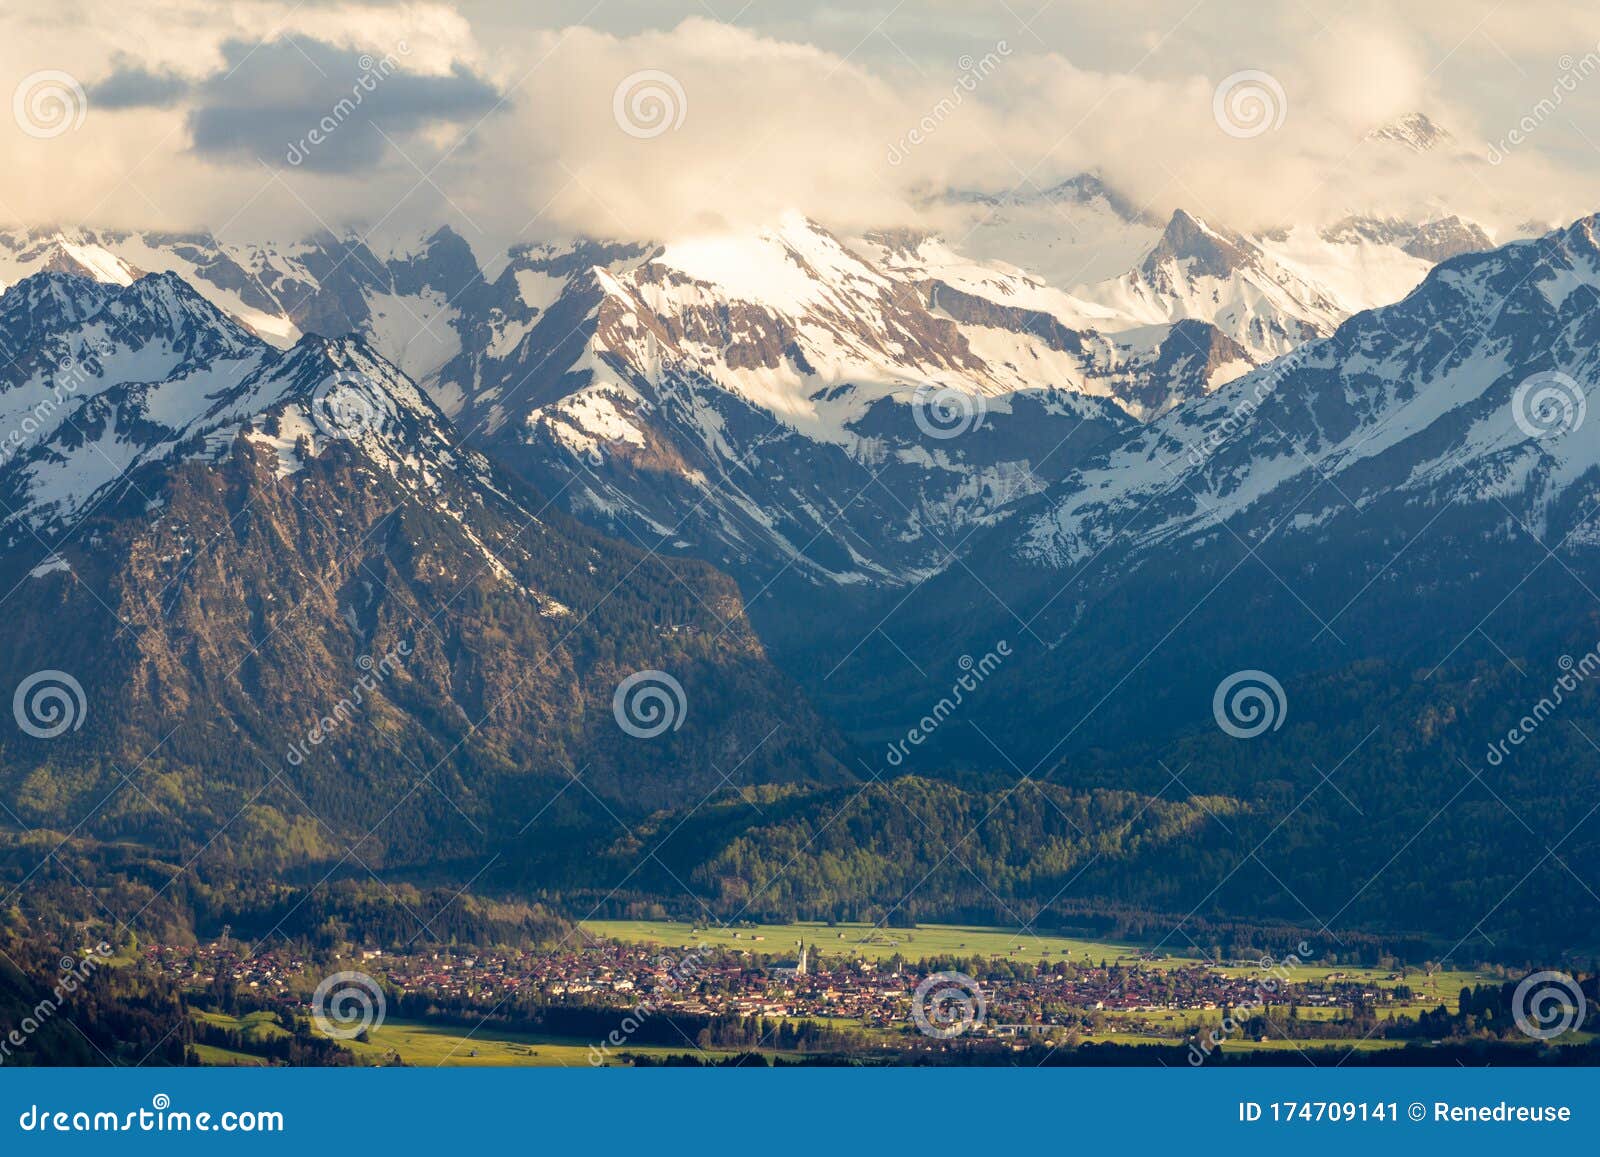 amazing view snow-covered mountains with village in valley. sunset or sunrise in oberstdorf, germany.